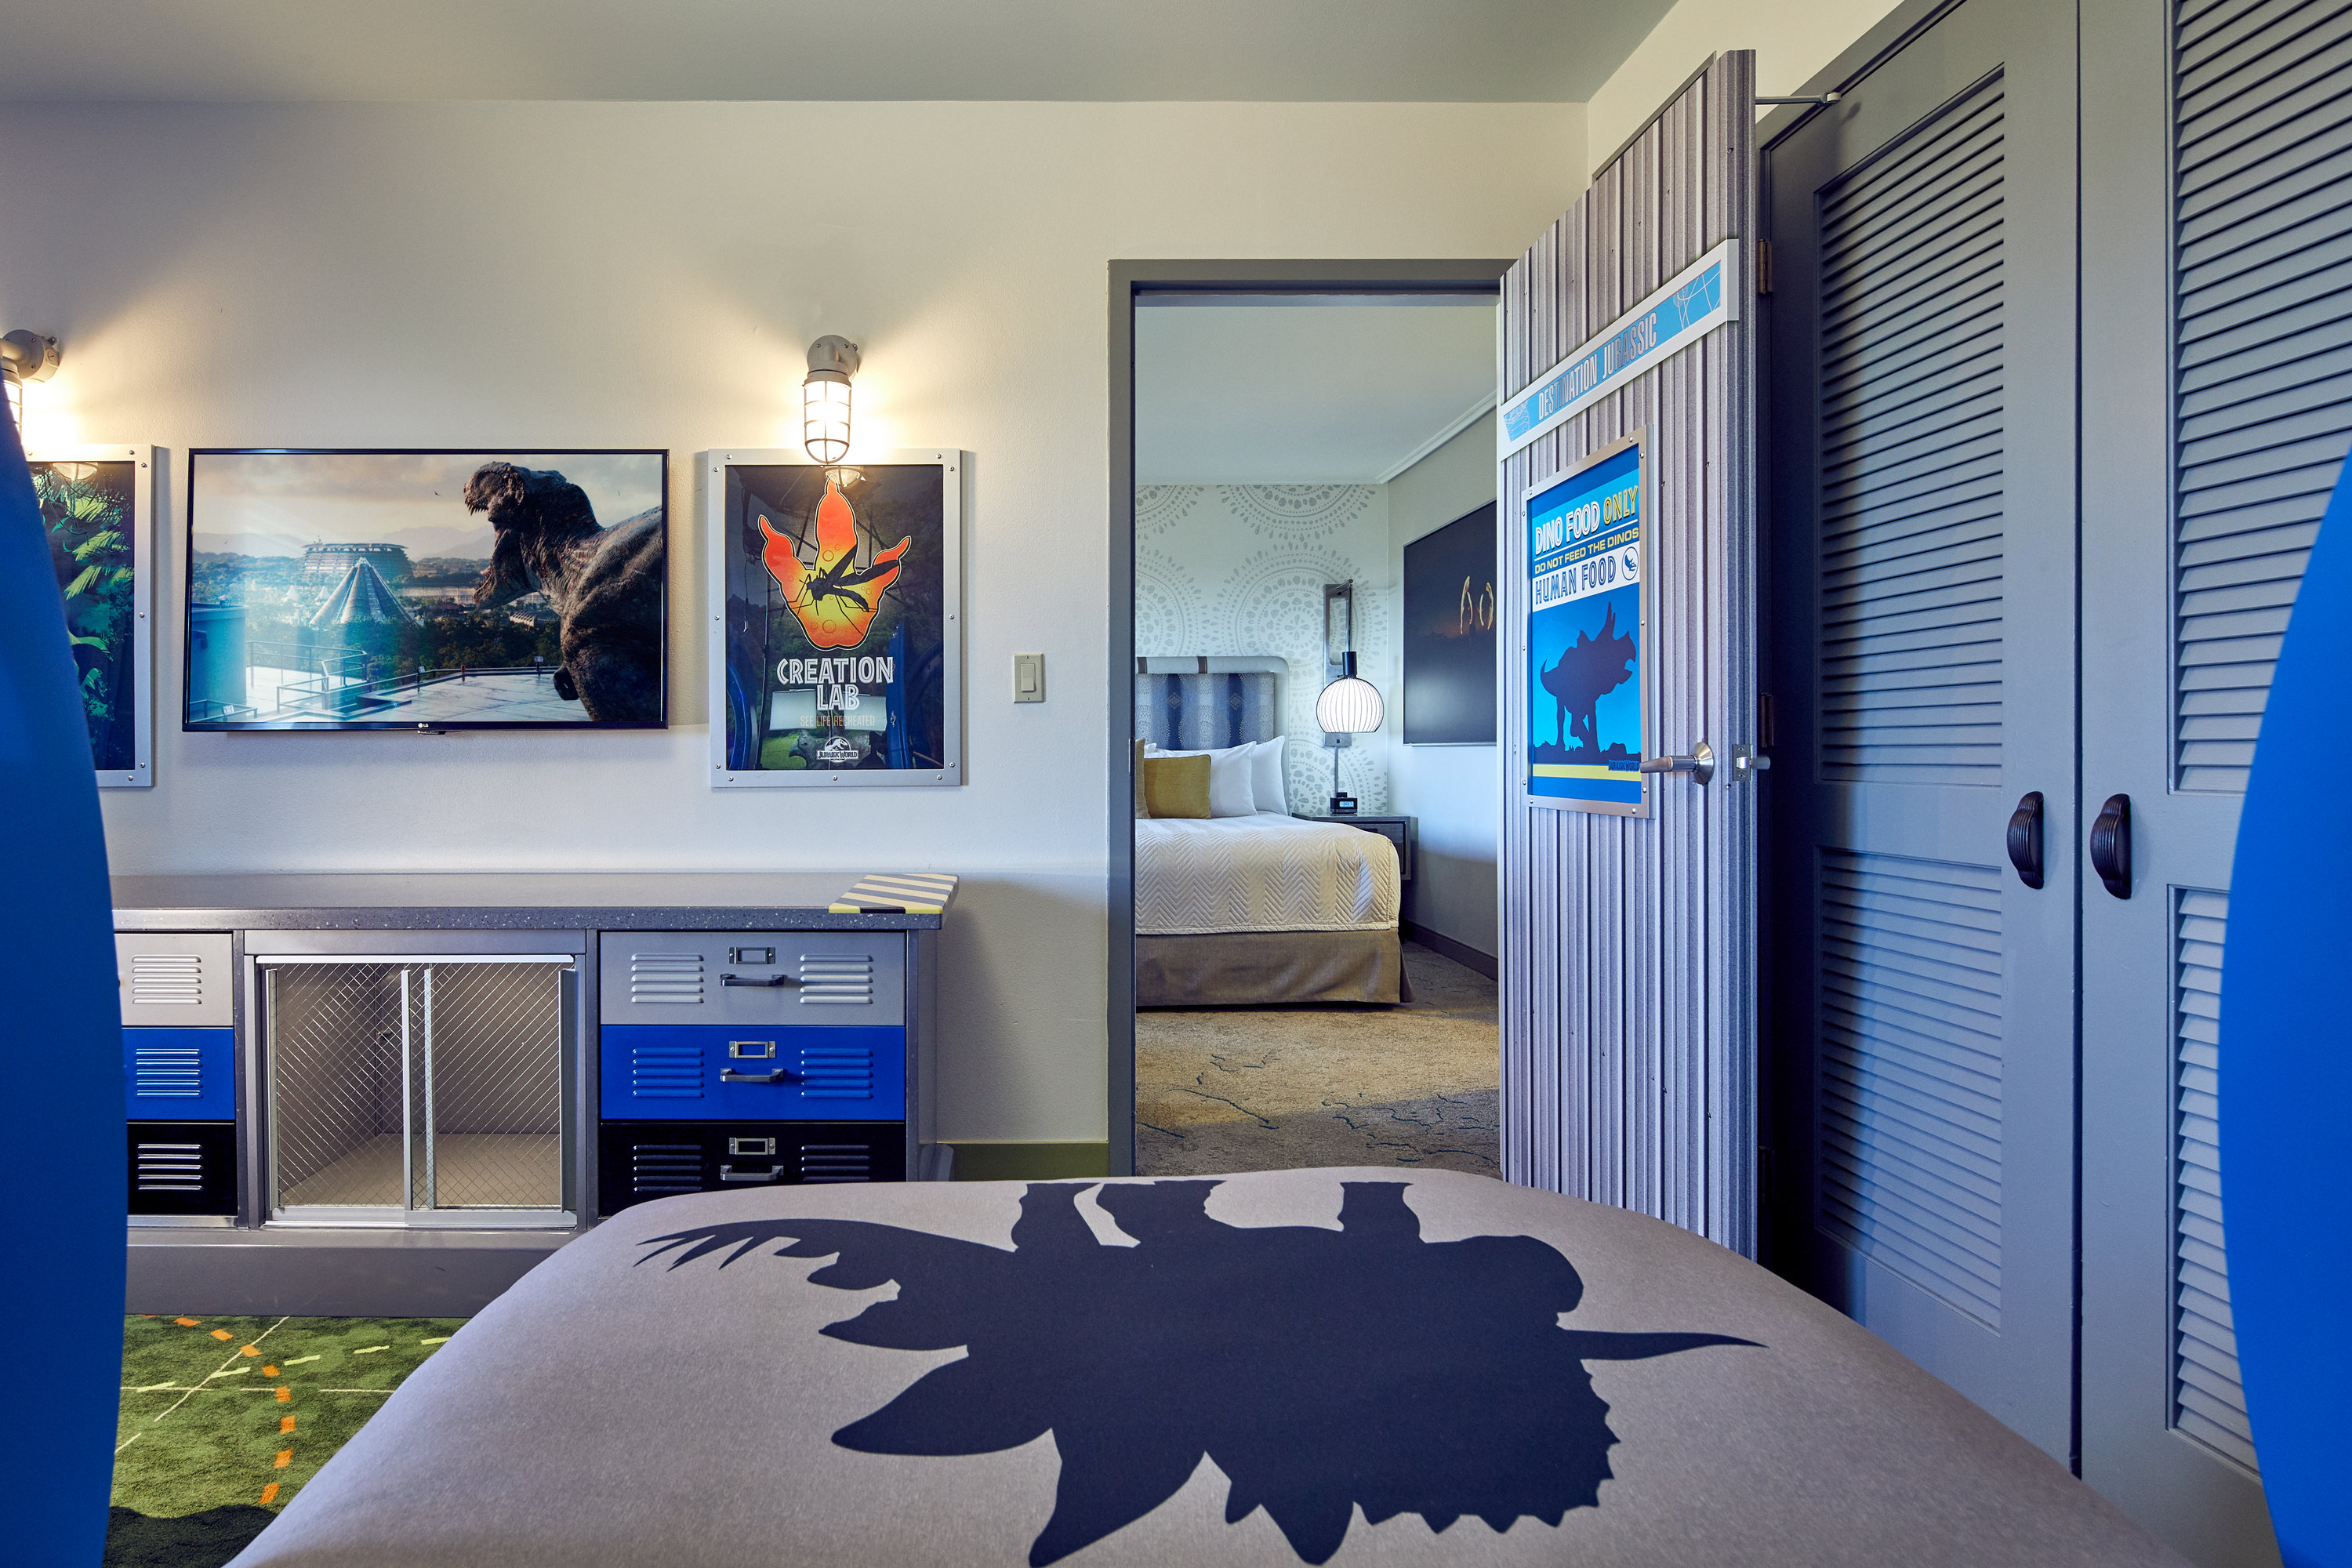 Jurassic World Kids Suite from Bed